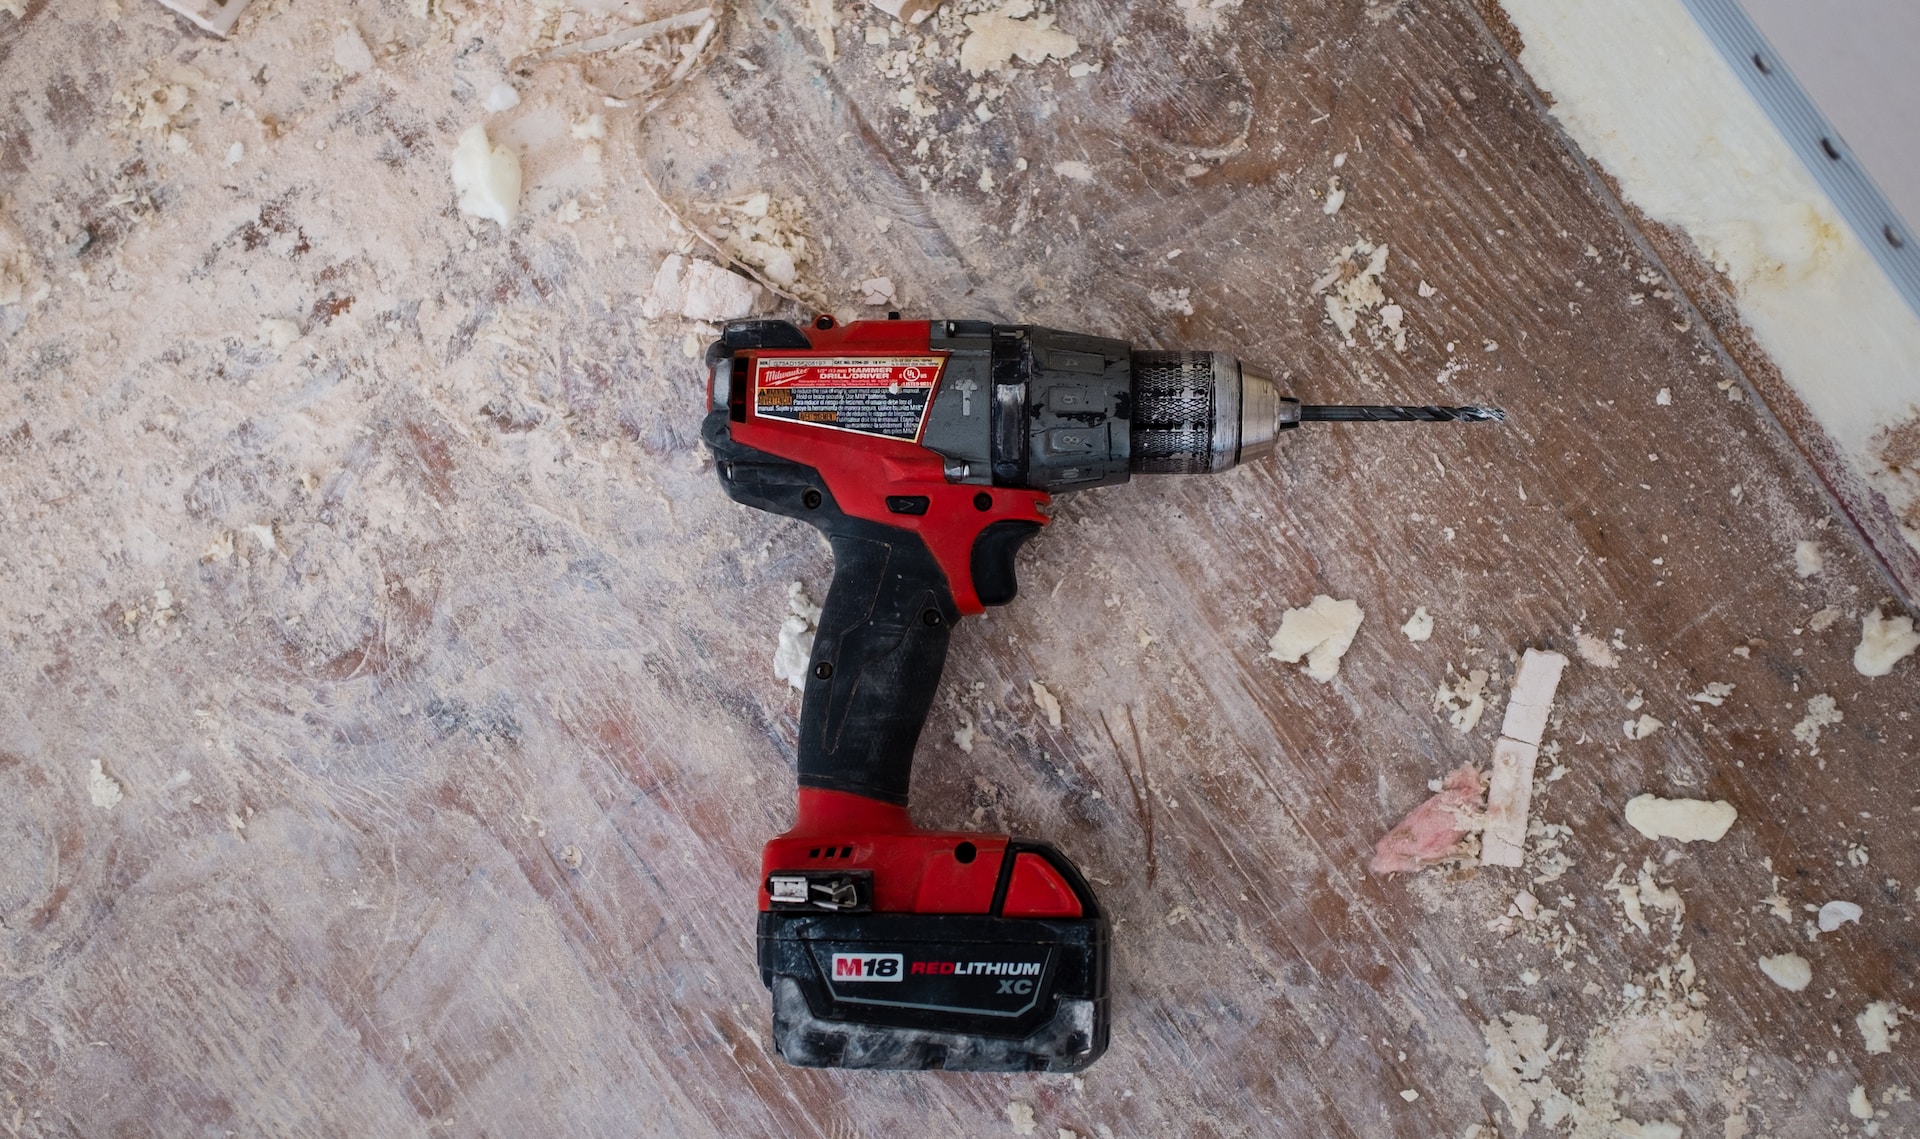 A red electric drill on the ground